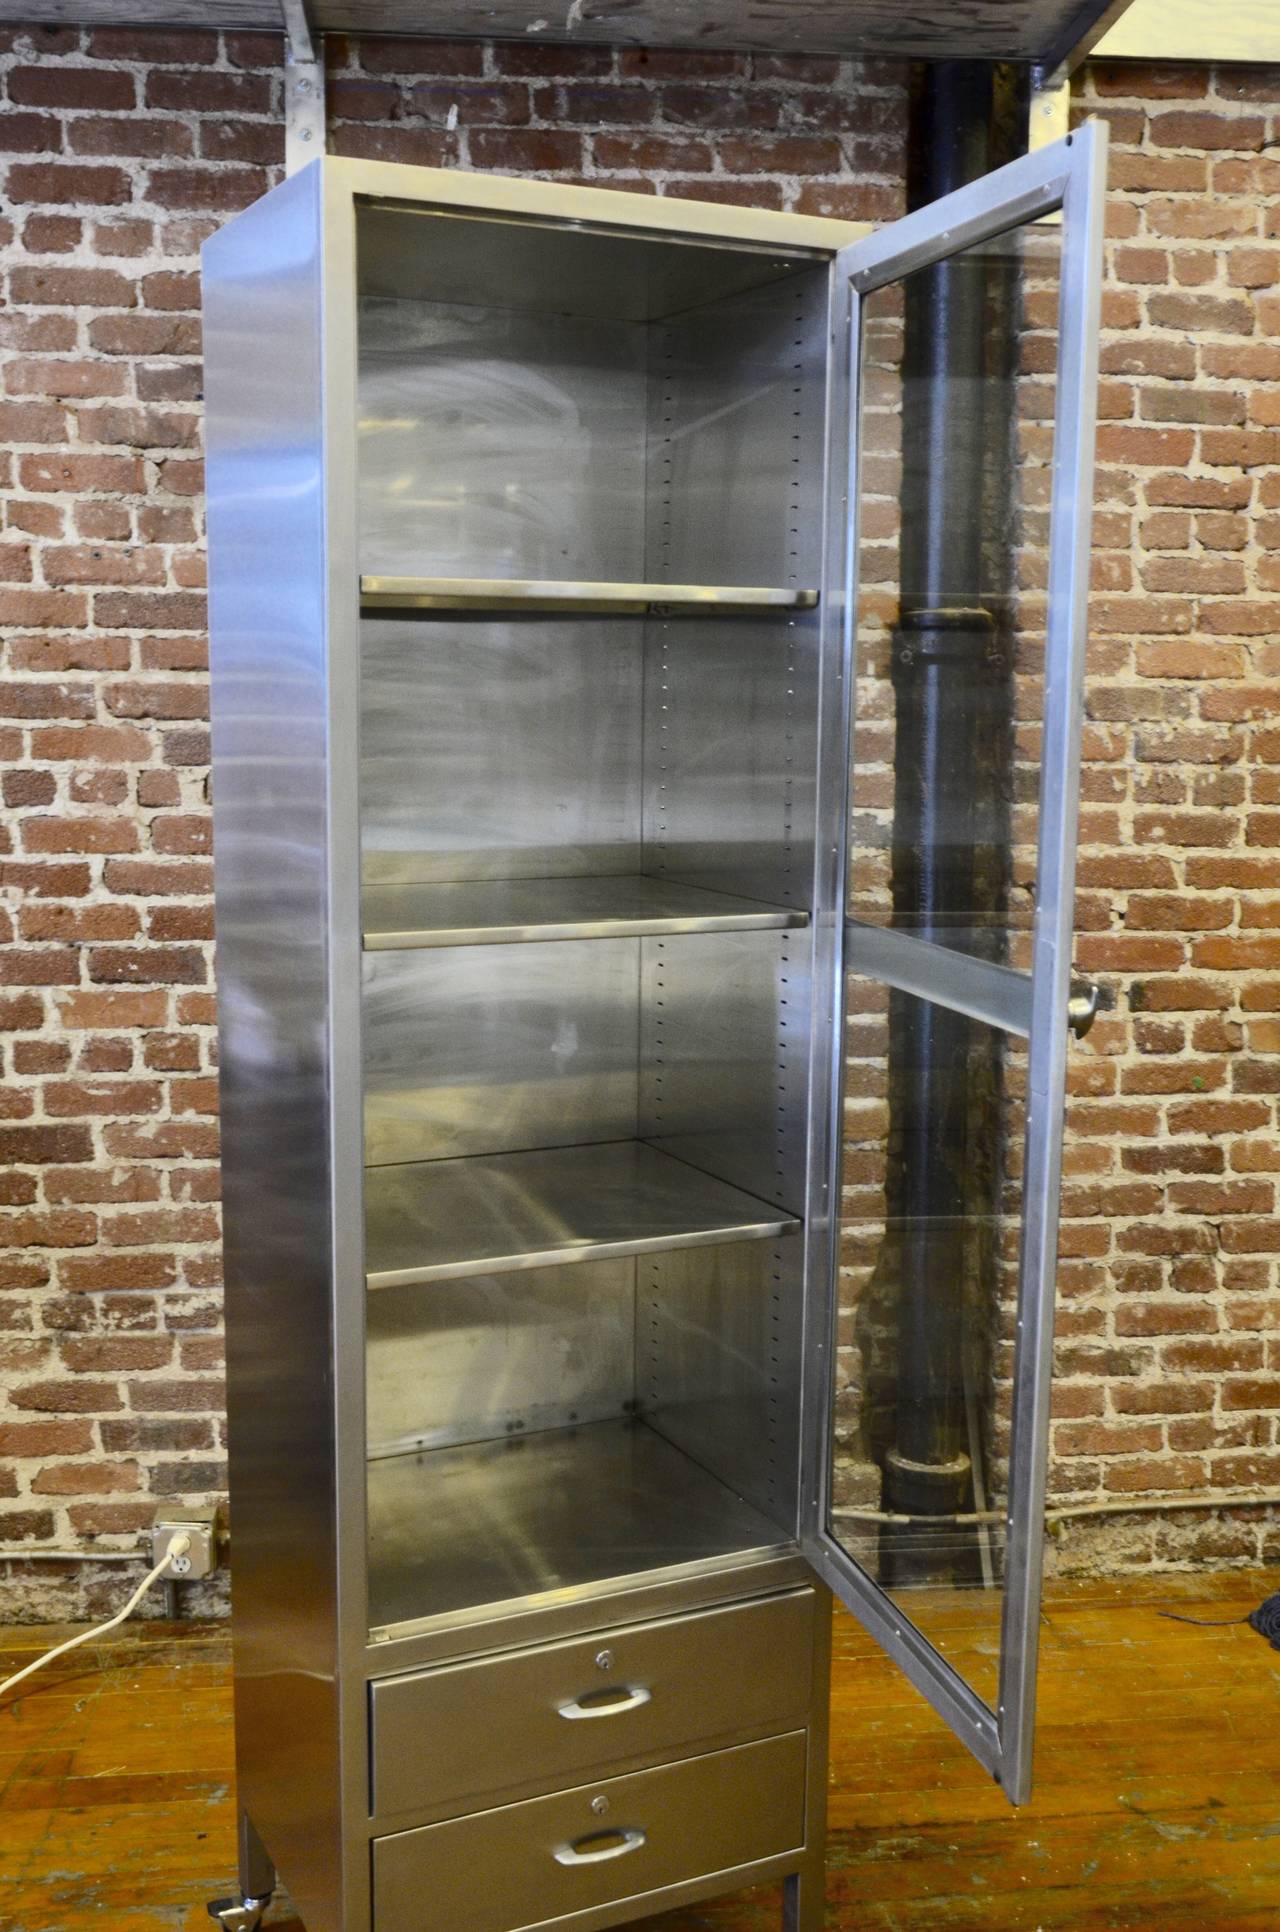 Excellent for storage and display! This classic stainless steel cabinet is tall and narrow making it a perfect choice where space is limited. This model has 4 shelves and 2 drawers. I have several of this size, please inquire.

Please feel free to